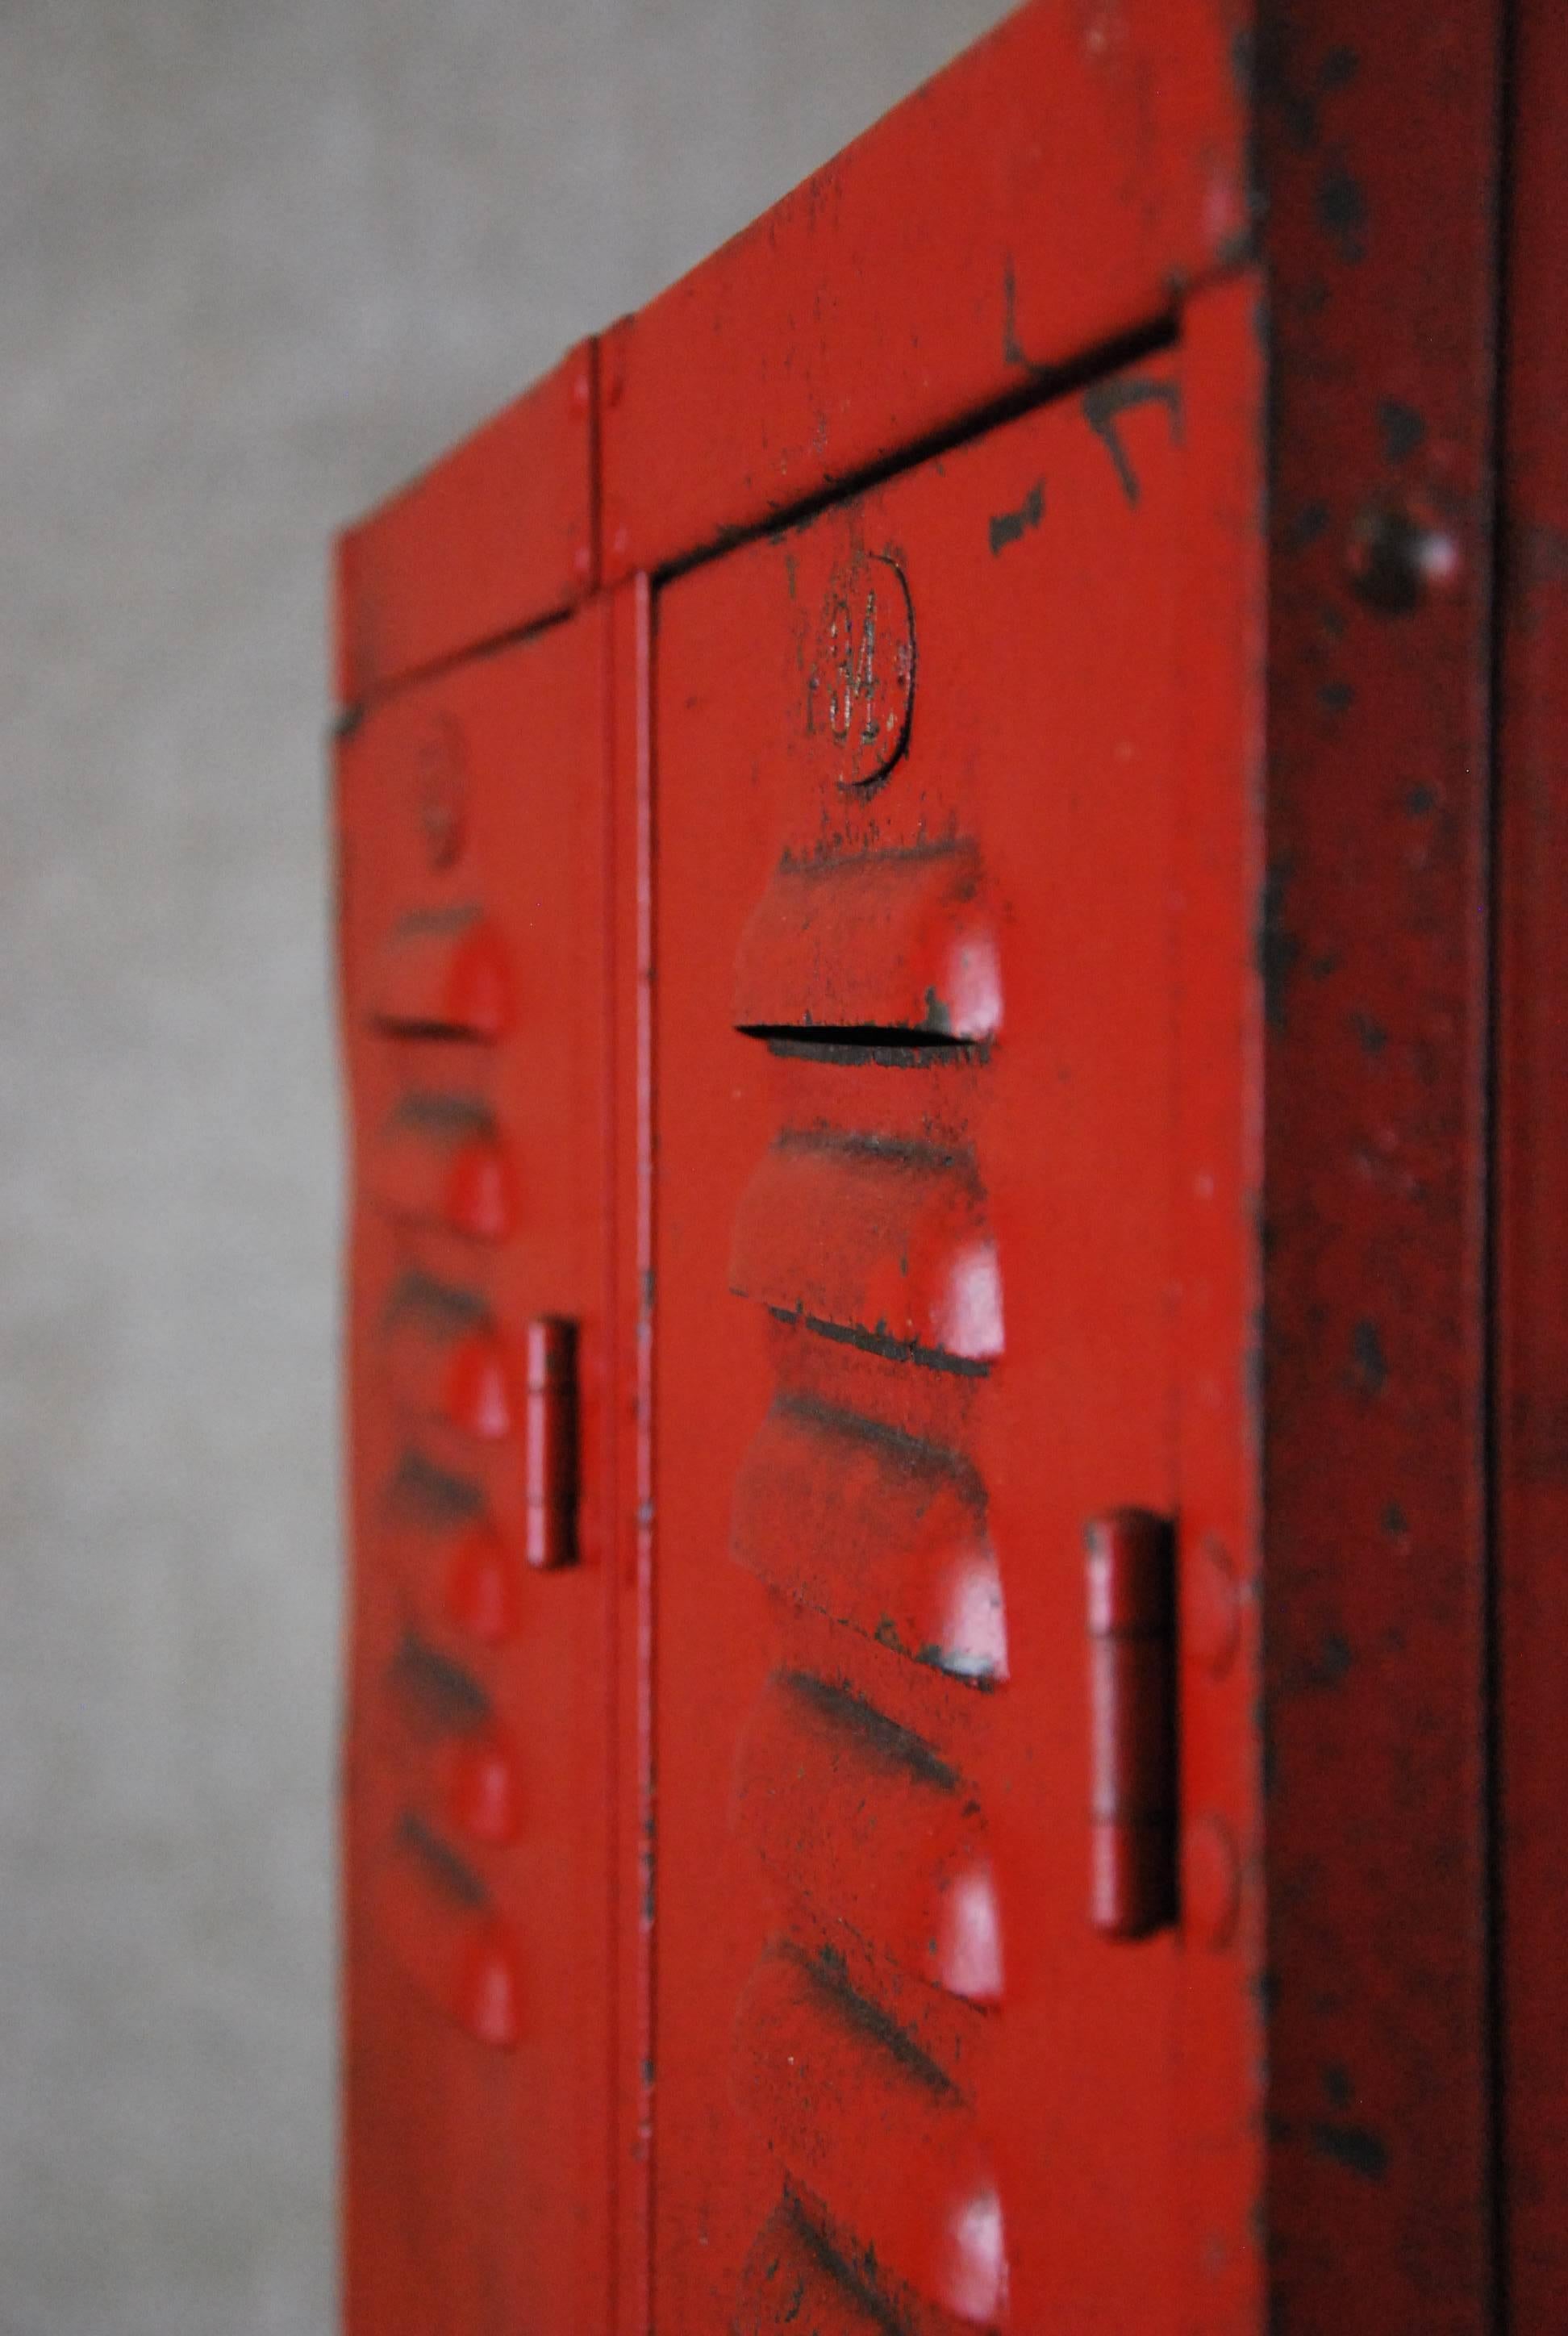 Early 20th century vintage Industrial double unit freestanding locker comprised of a heavy gauge steel with riveted joints with original red paint finish. The hinged locker doors feature louvered vents on both the top and bottom.

Fabricated by